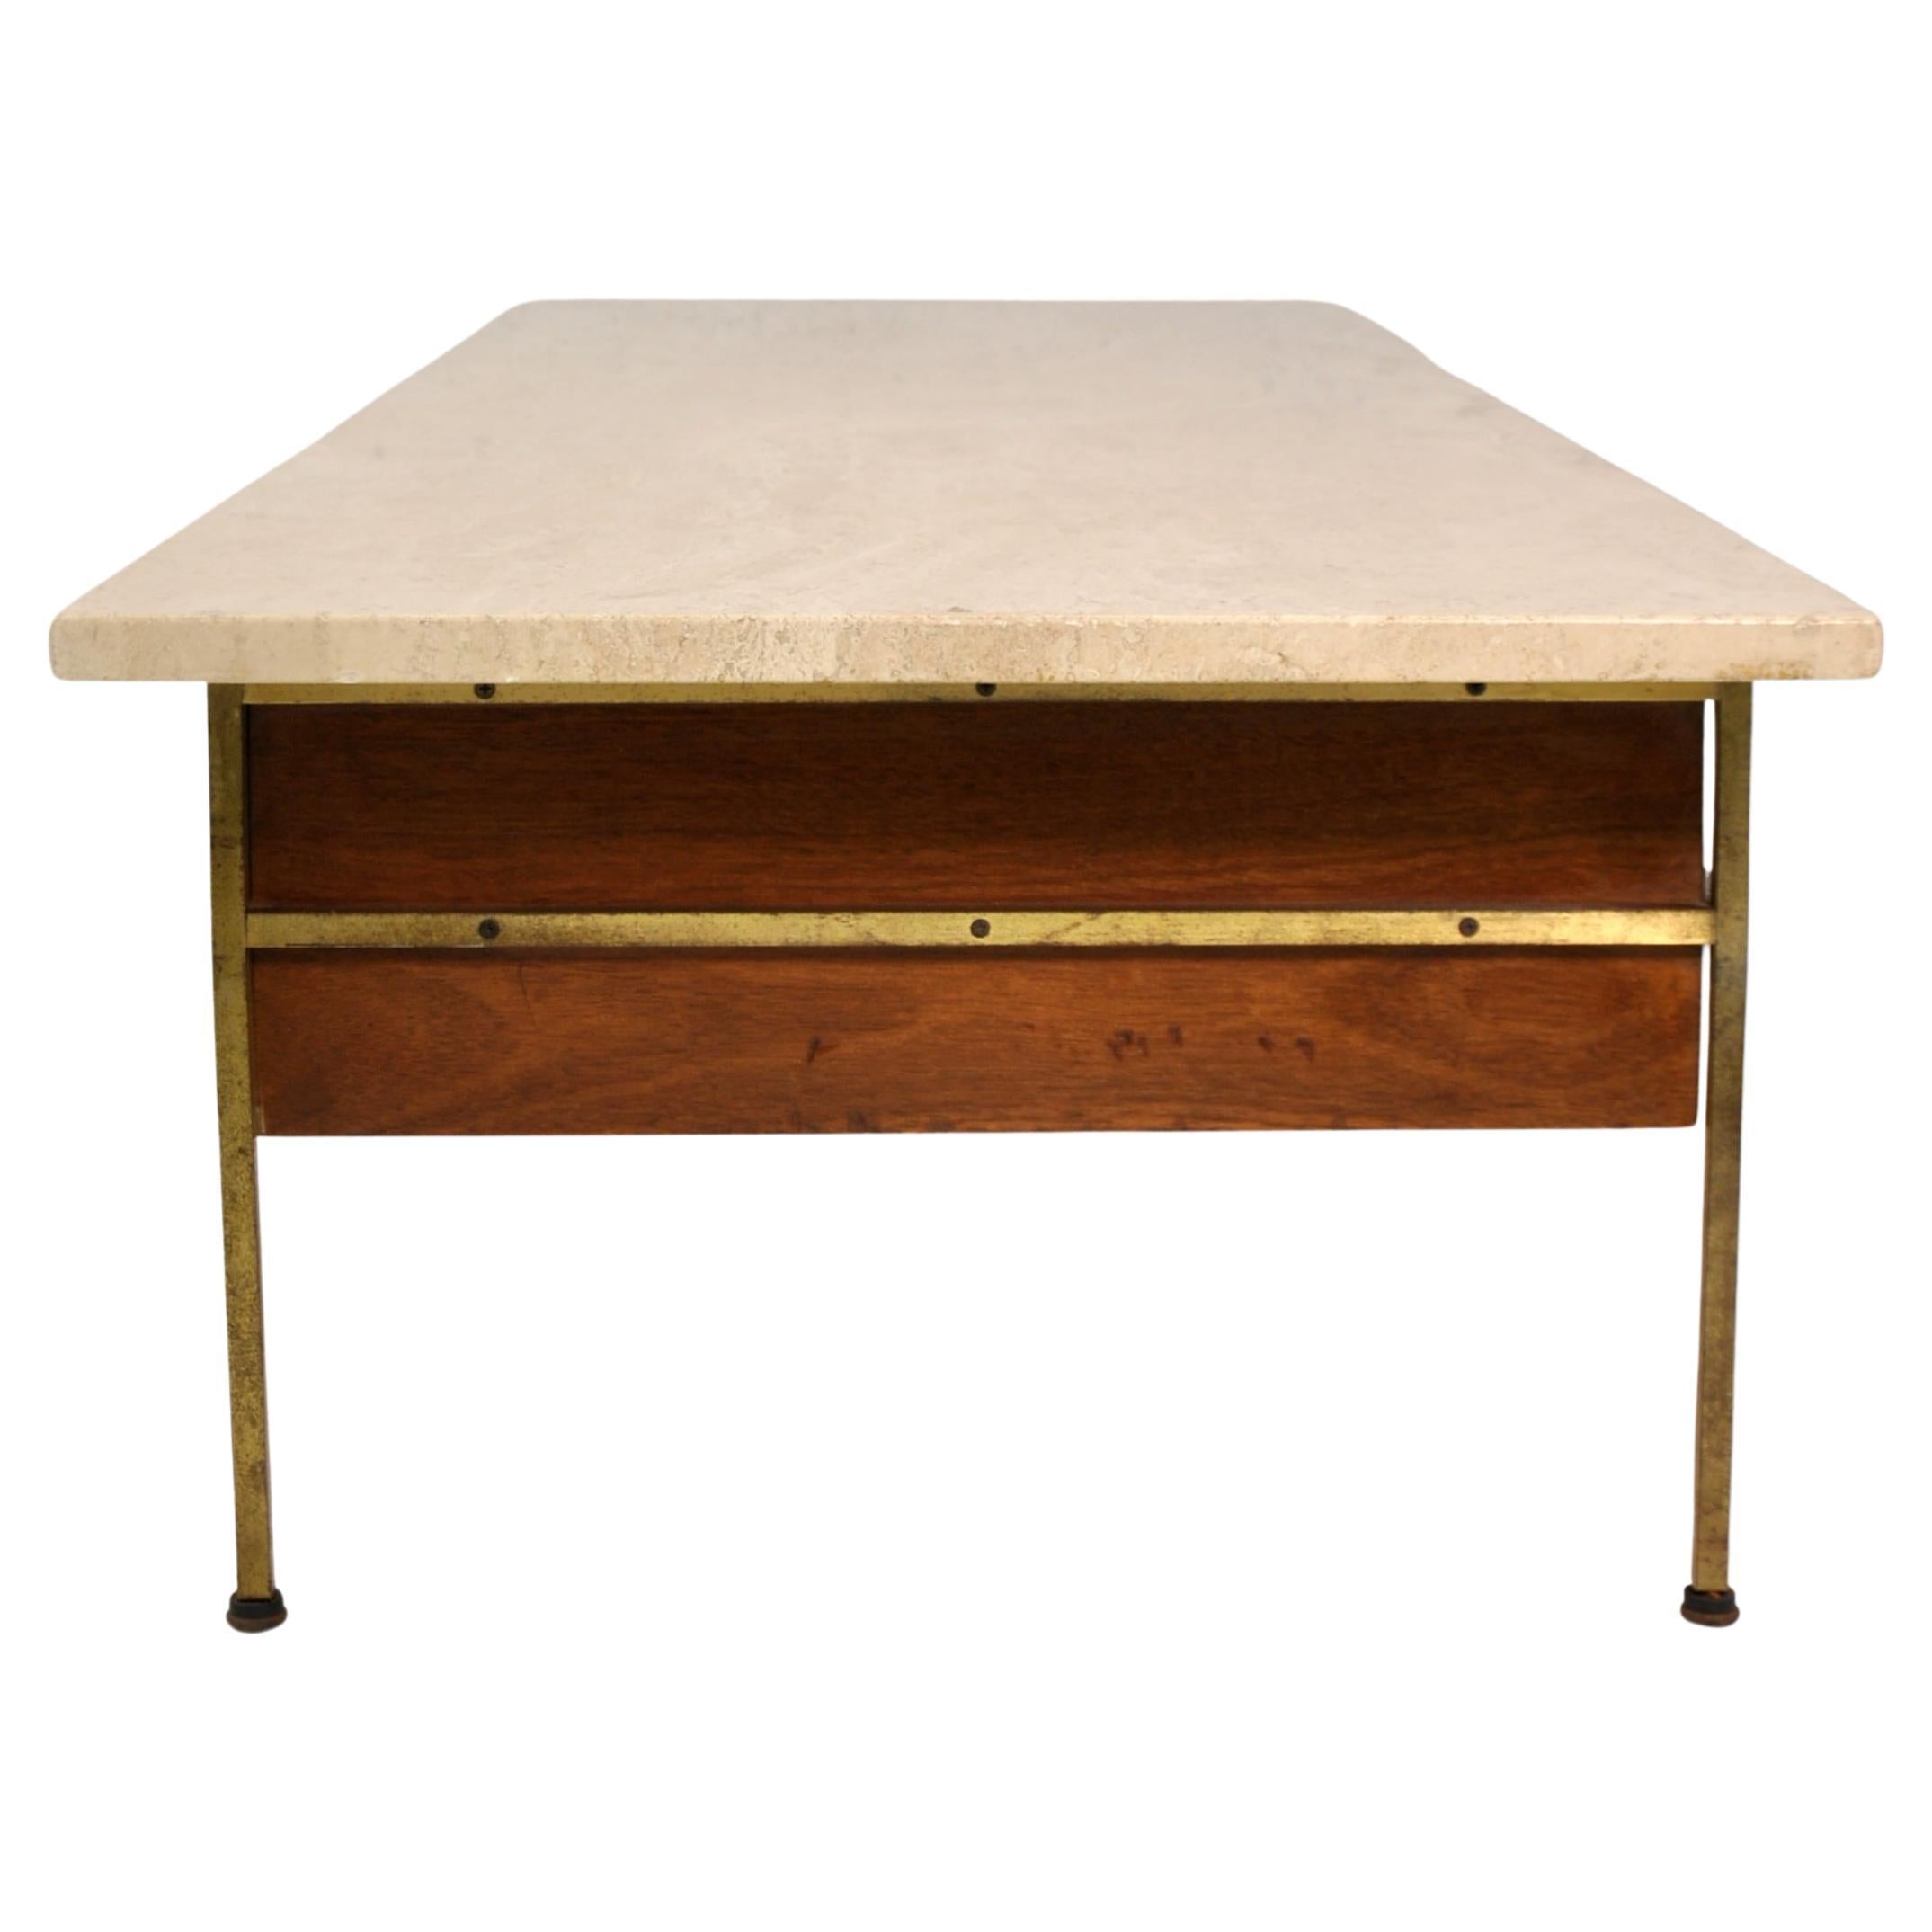 Mid-20th Century Paul McCobb Irwin Collection Brass and Travertine Coffee Table by Calvin